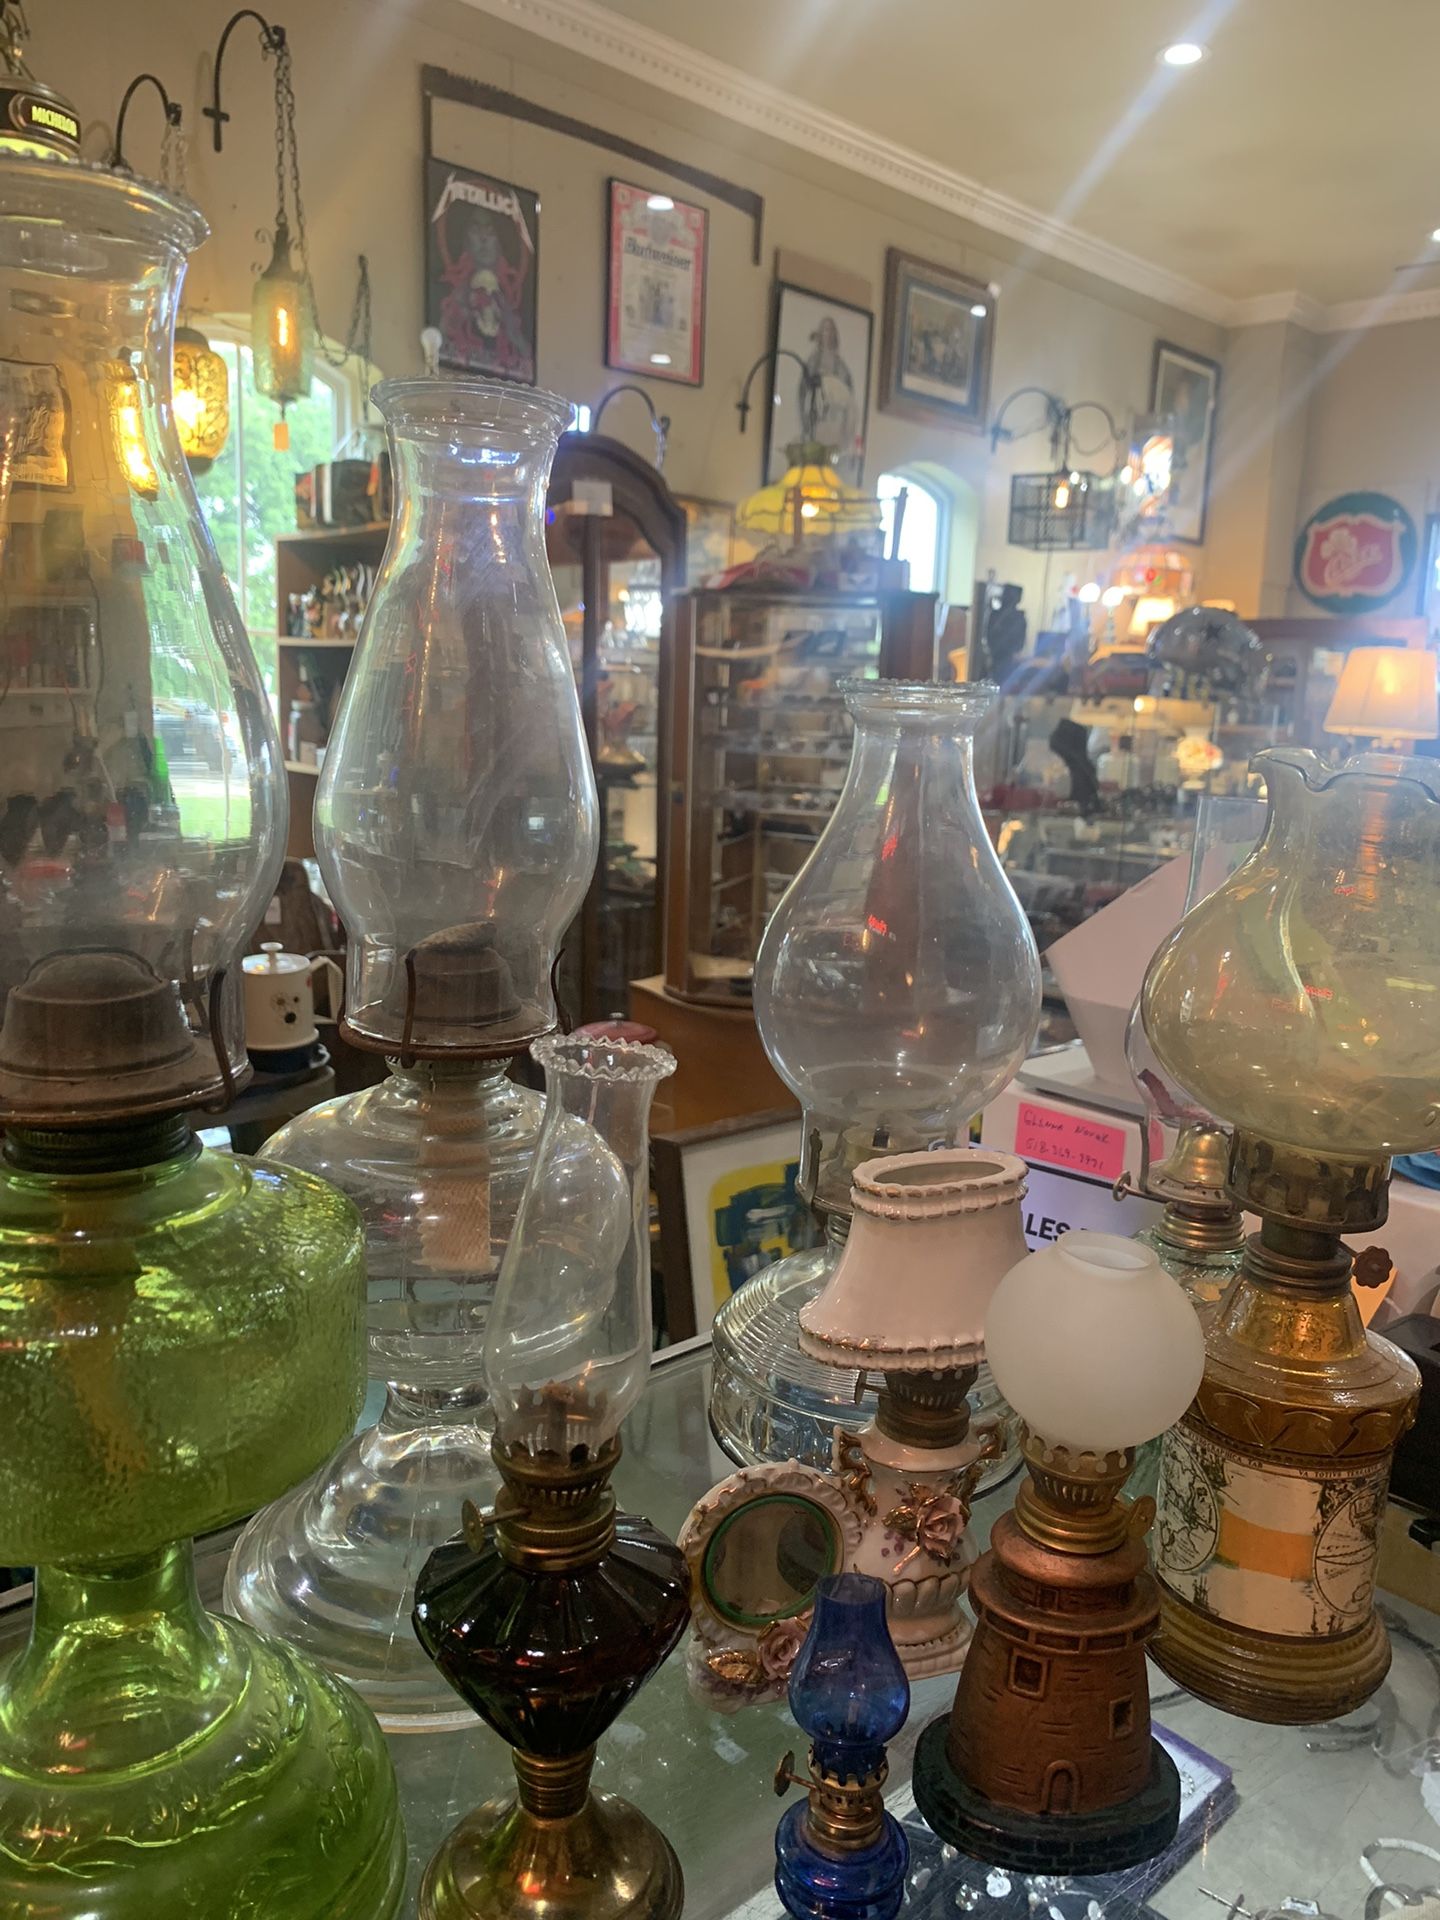 Antique oil lamps of all sizes and shapes.  Prices between 10 to 35.00.  Johanna at Antiques and More. Located at 316b Main Street Buda. Antiques vint